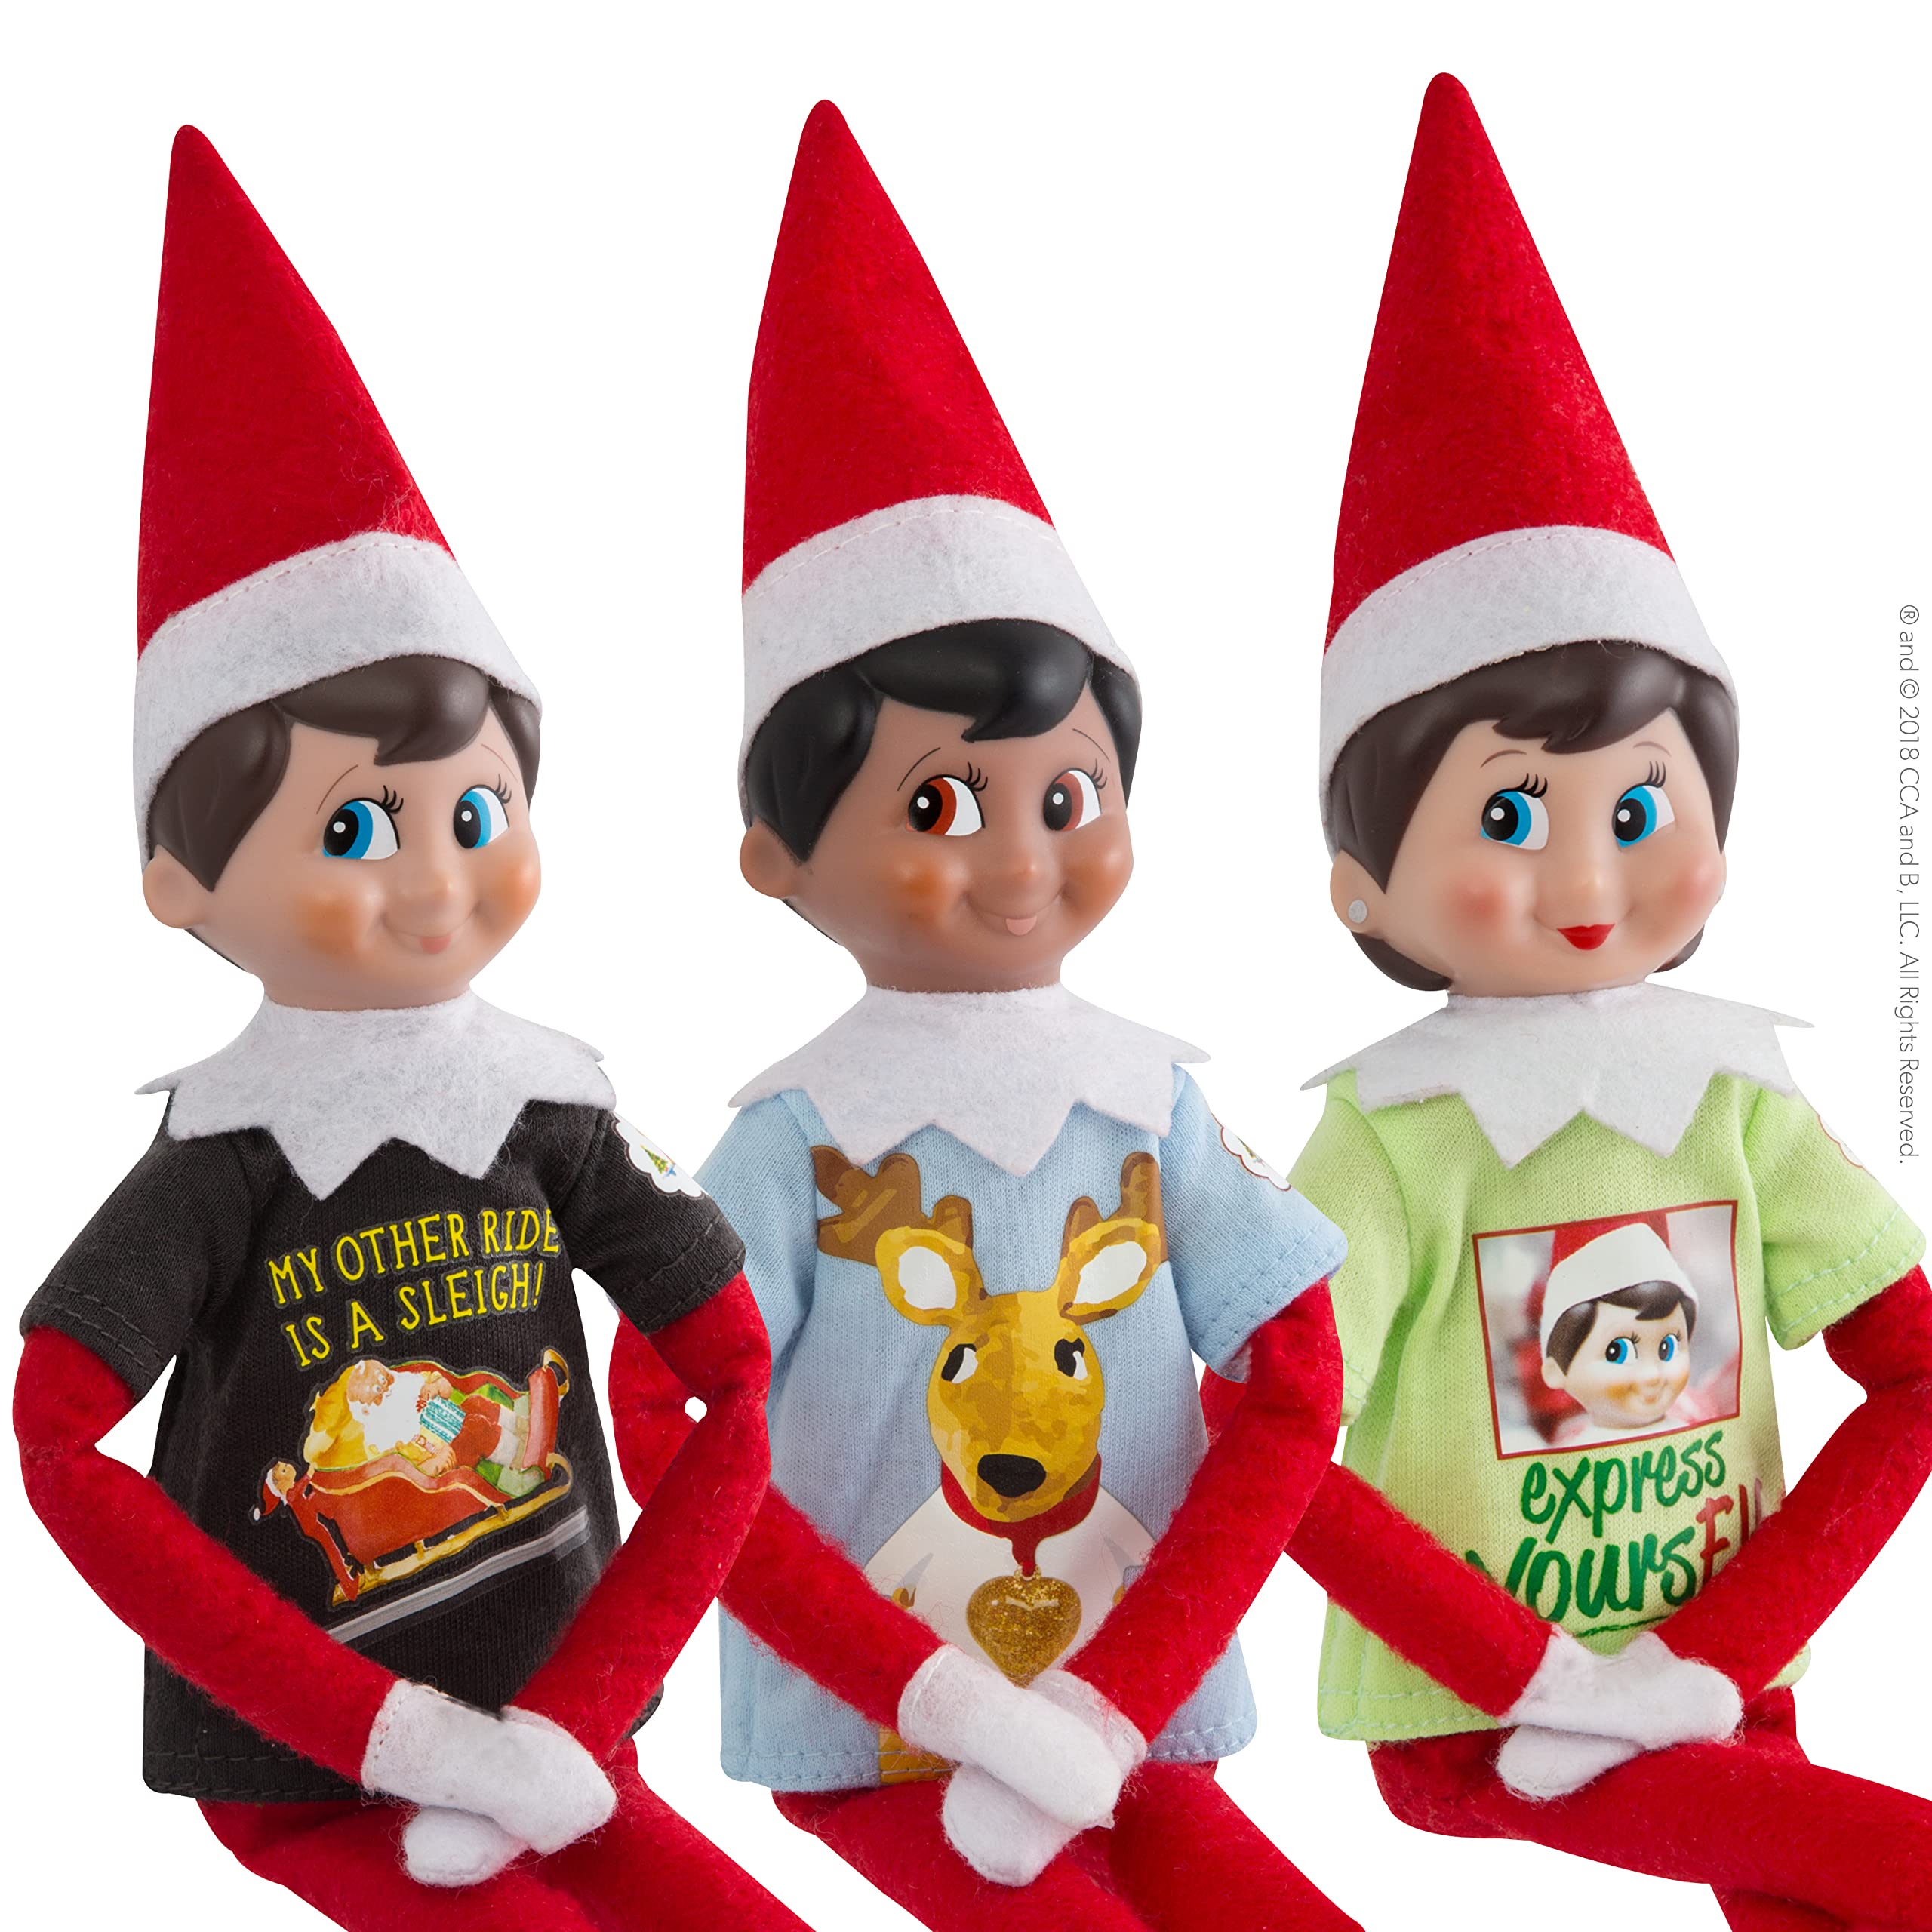 The Elf on the Shelf Clothing Set - 3 Tshirt Value Pack and Carrying Case - Three Stylish Tees For Boy Elf or Girl Elf